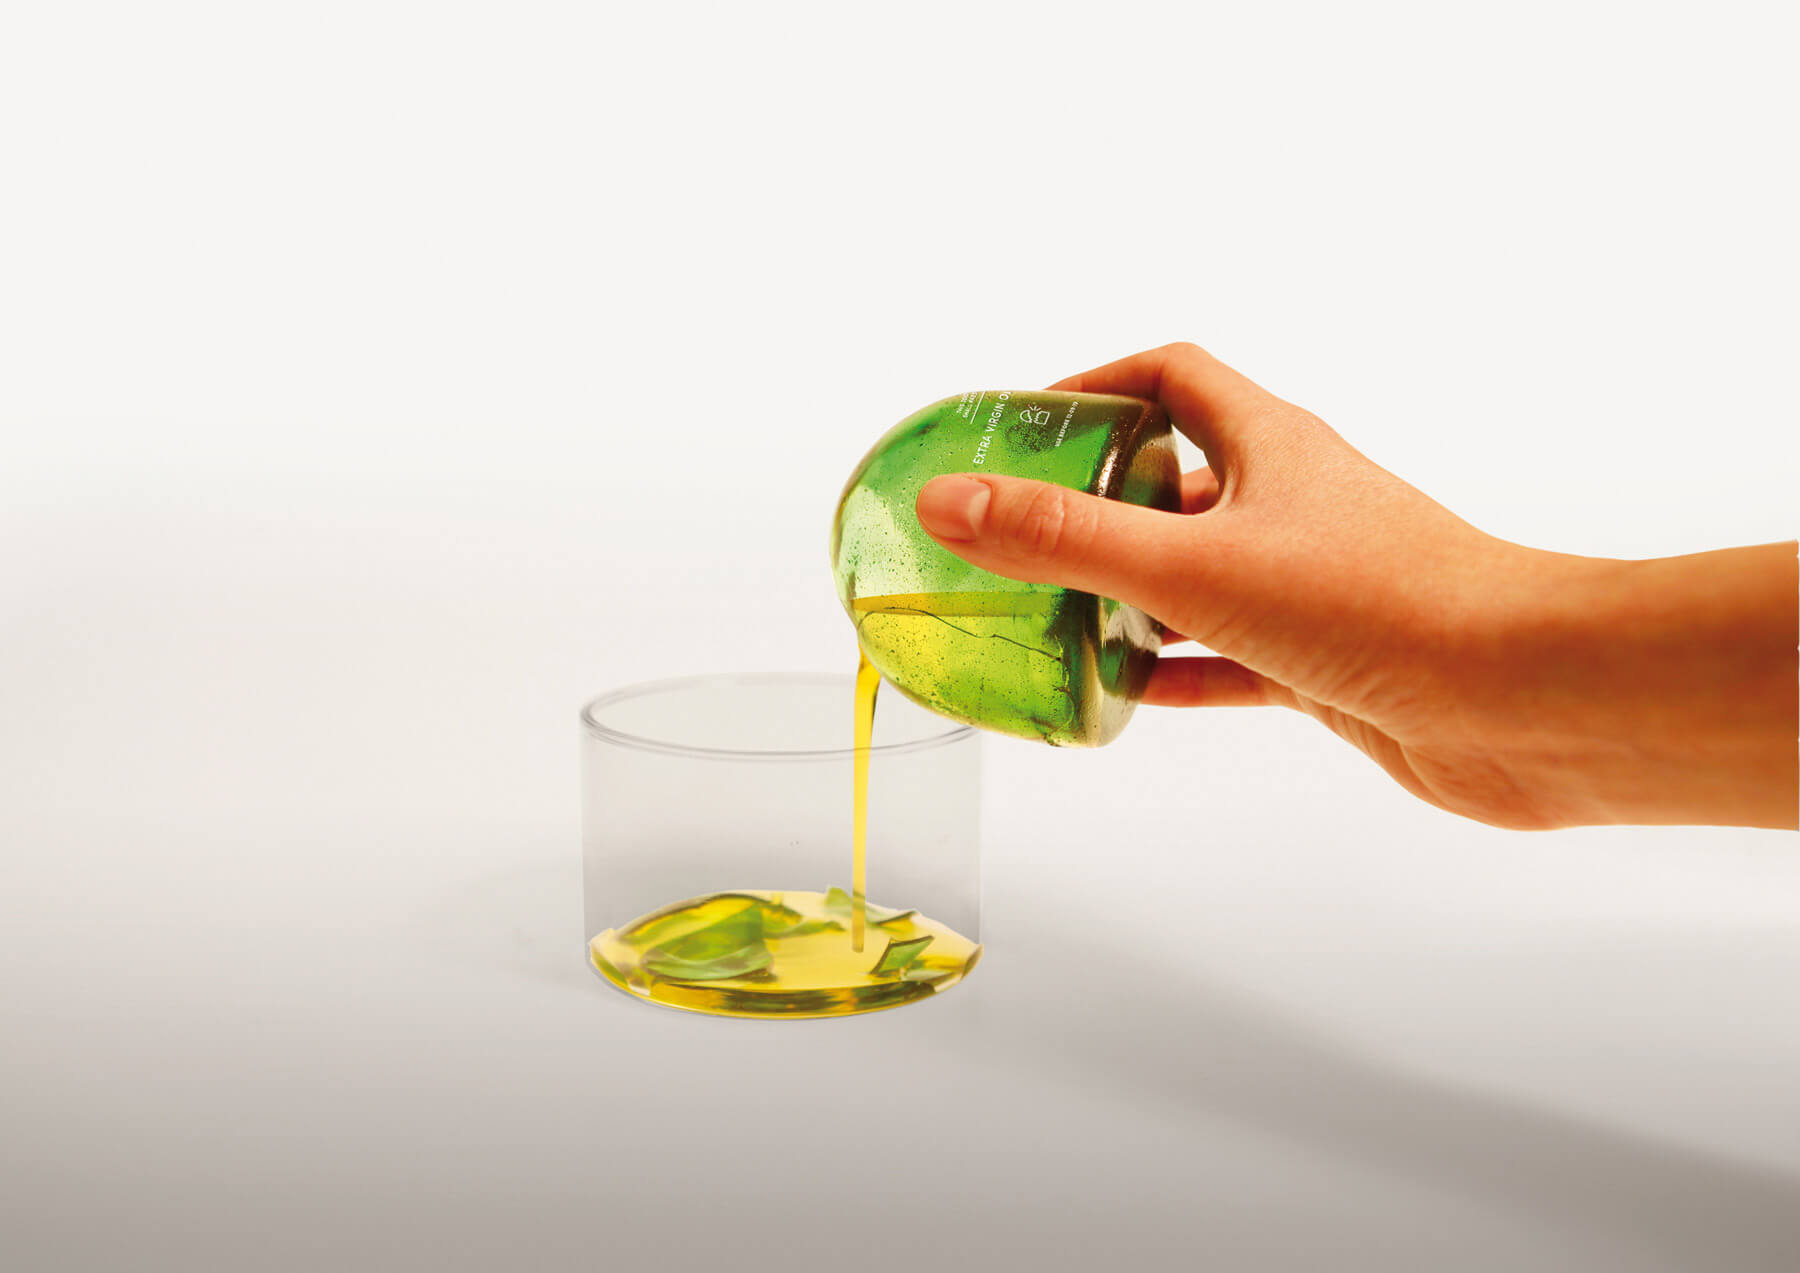 Oil being poured into a glass from the oil package